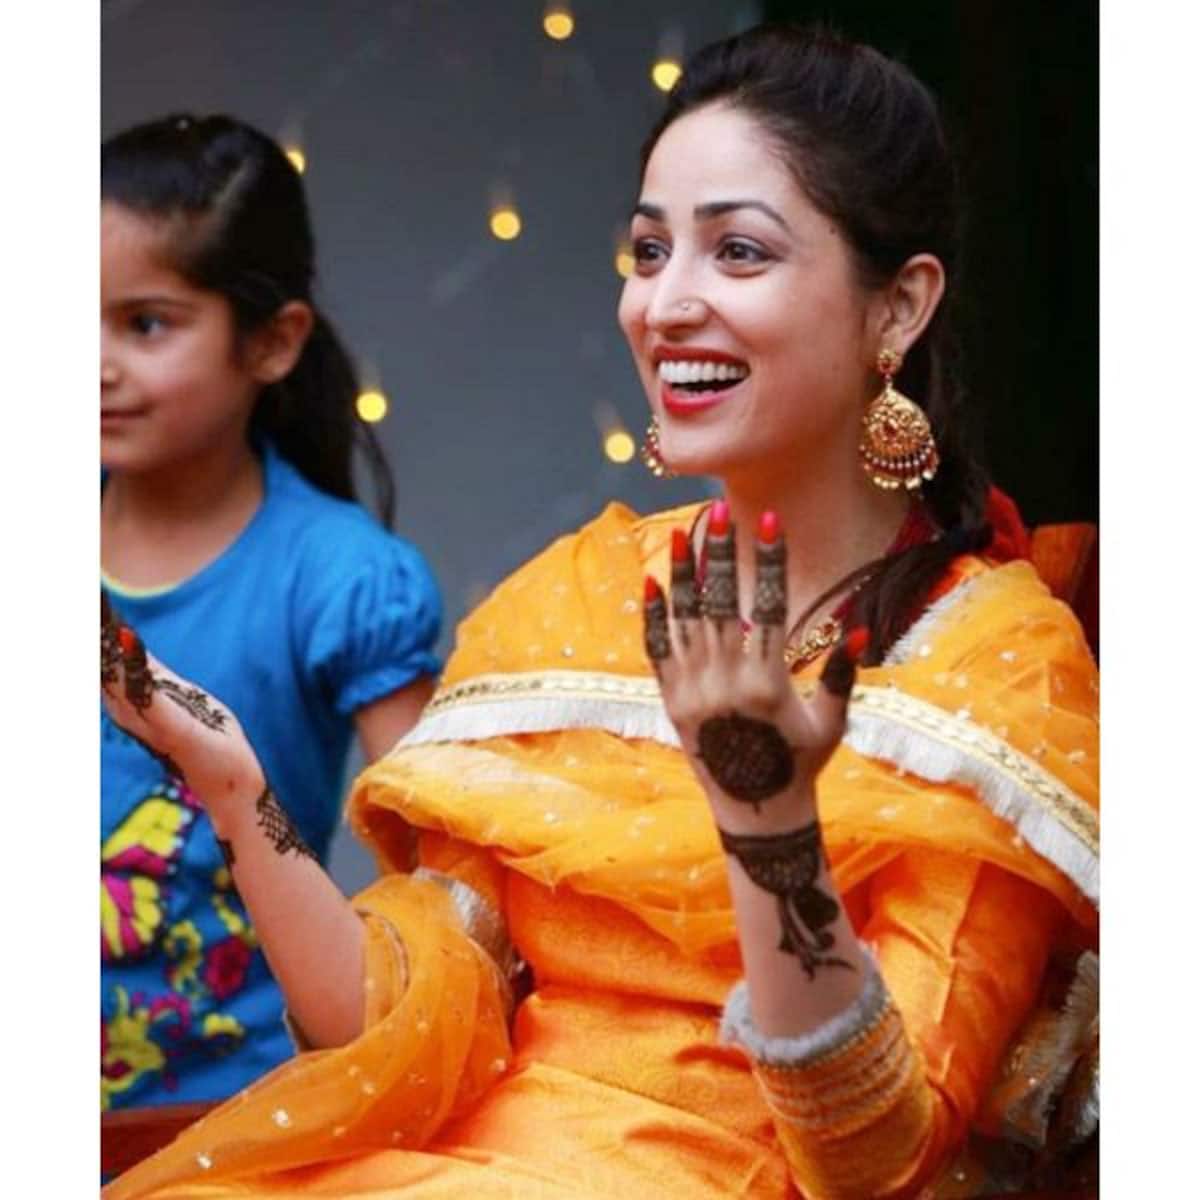 Yami Gautam-Aditya Dhar wedding: These inside pics of the couple's marriage  and mehendi ceremony are absolutely dreamy